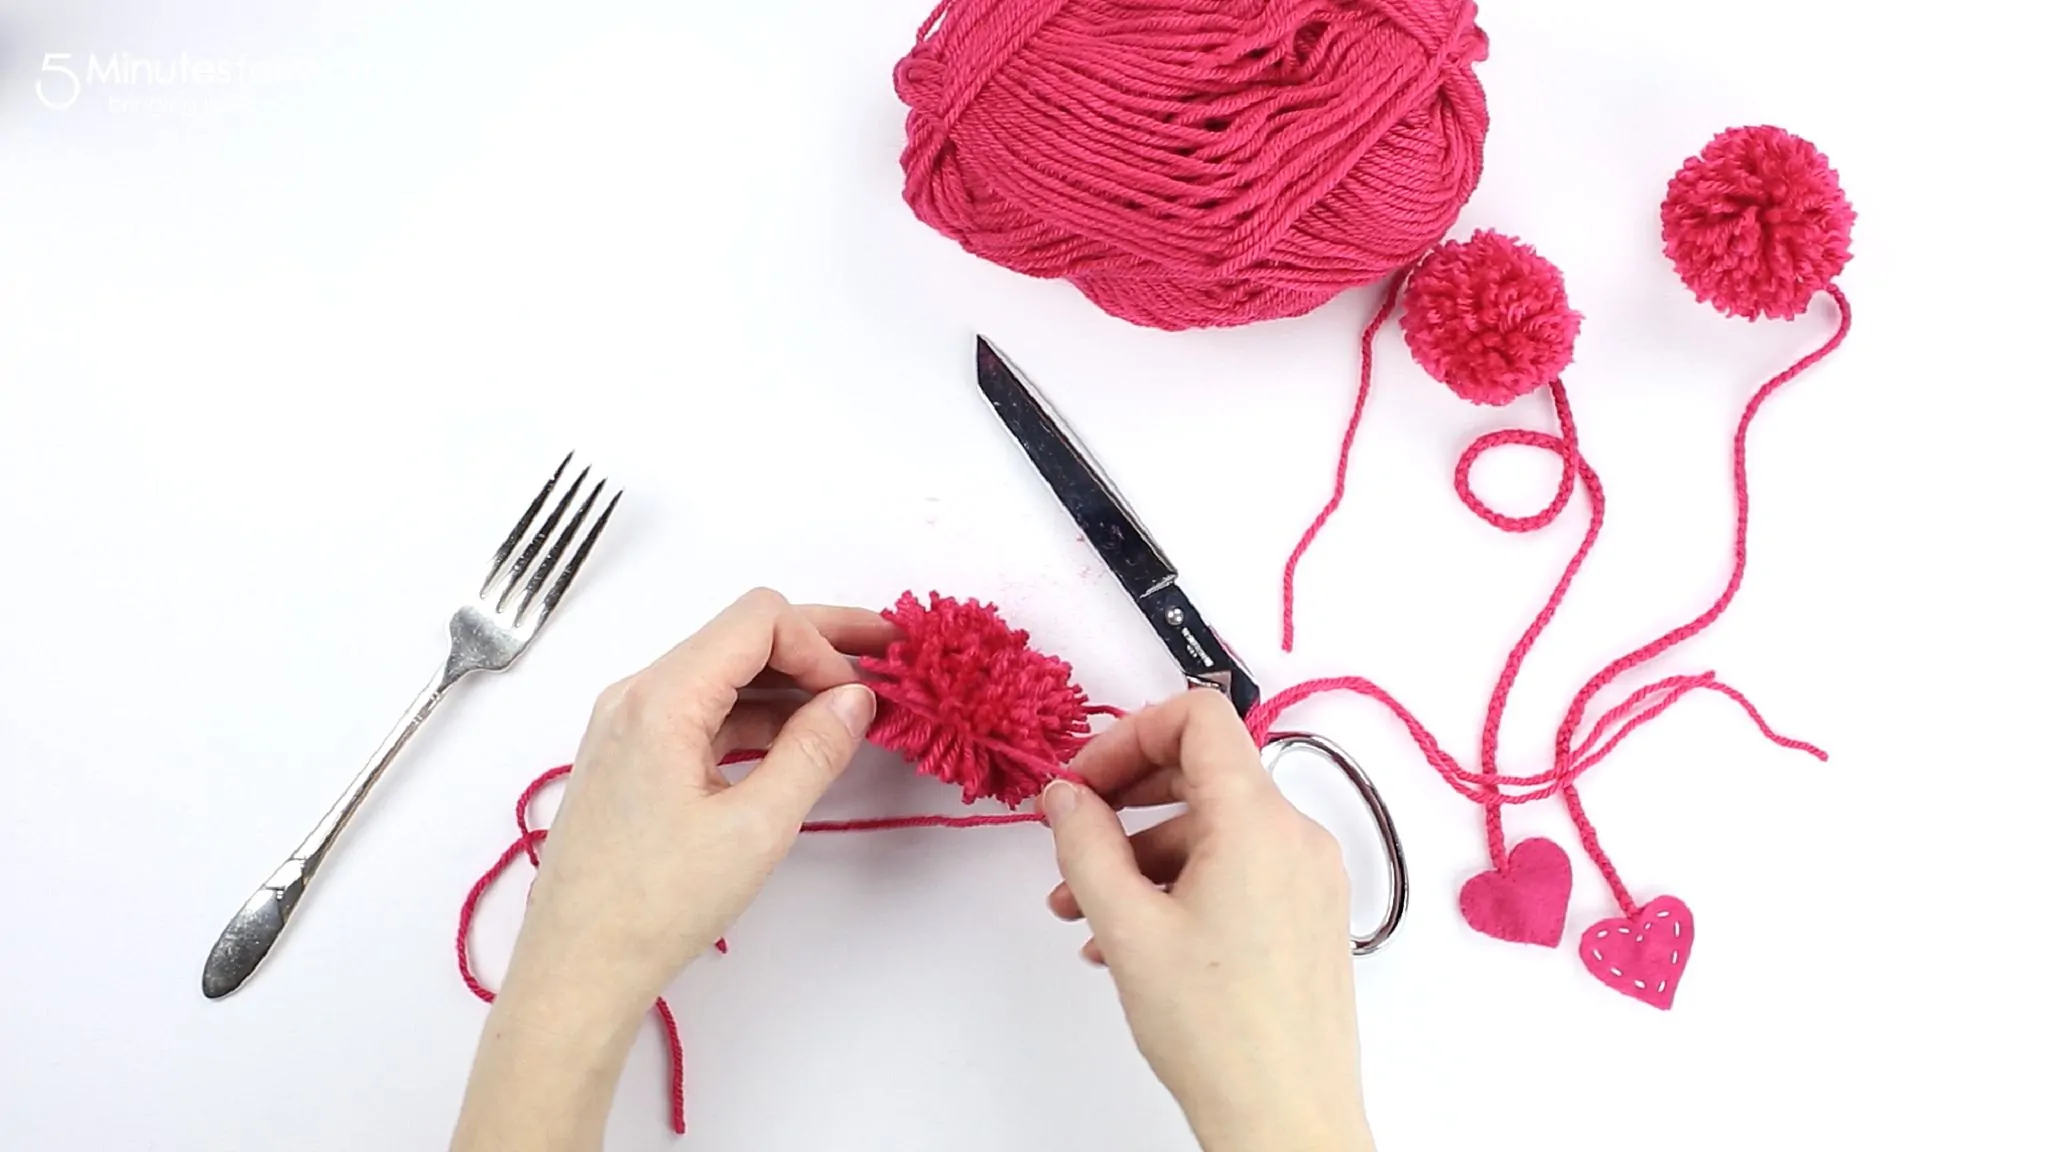 remove pom pom from fork and tie another knot